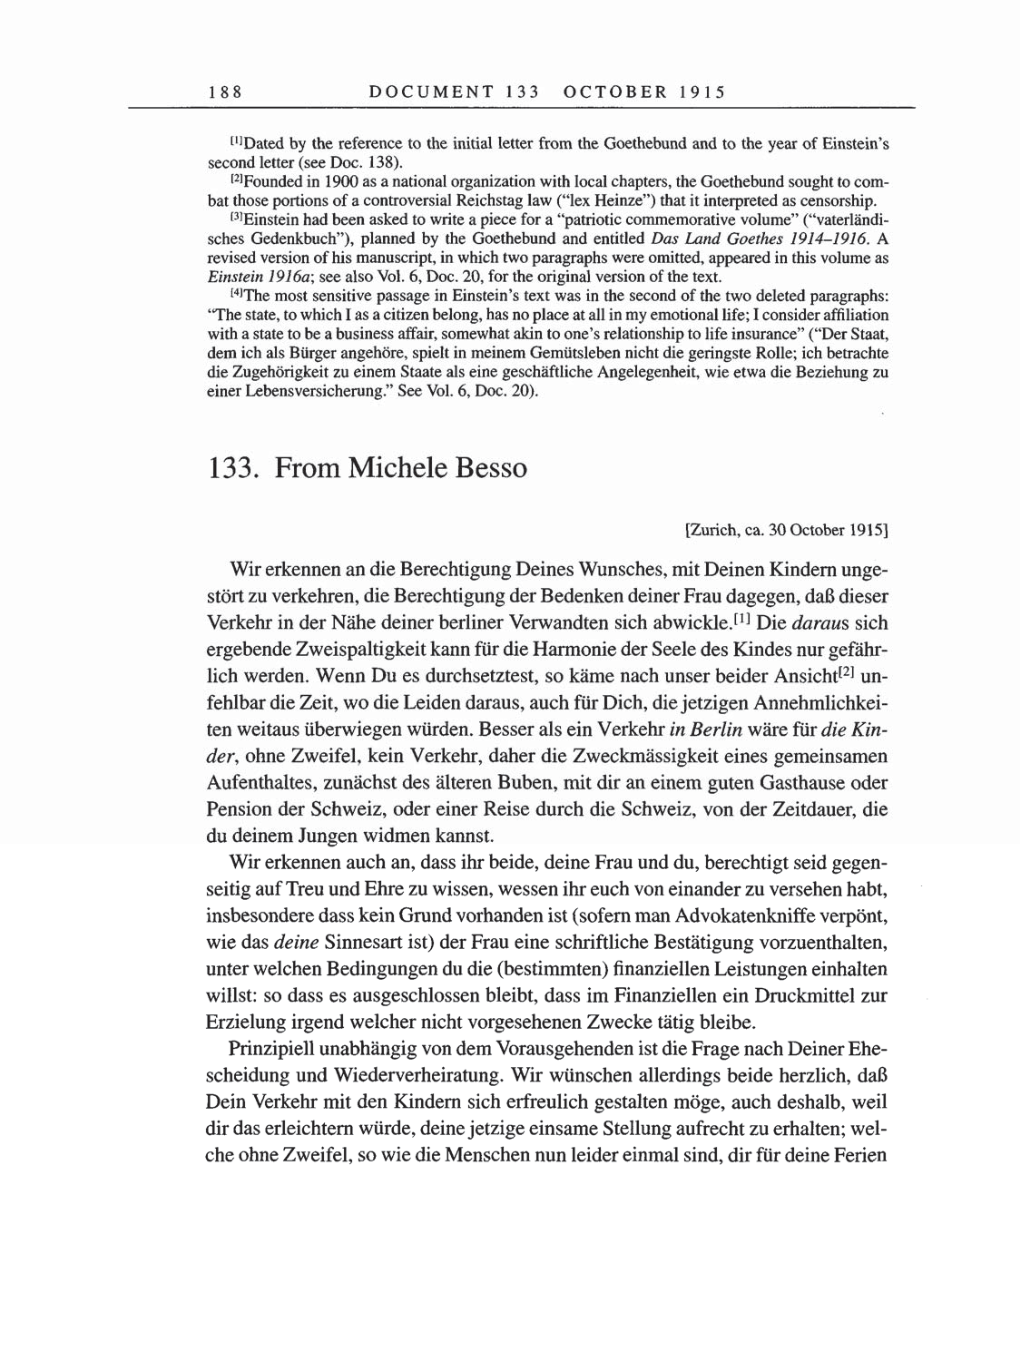 Volume 8, Part A: The Berlin Years: Correspondence 1914-1917 page 188